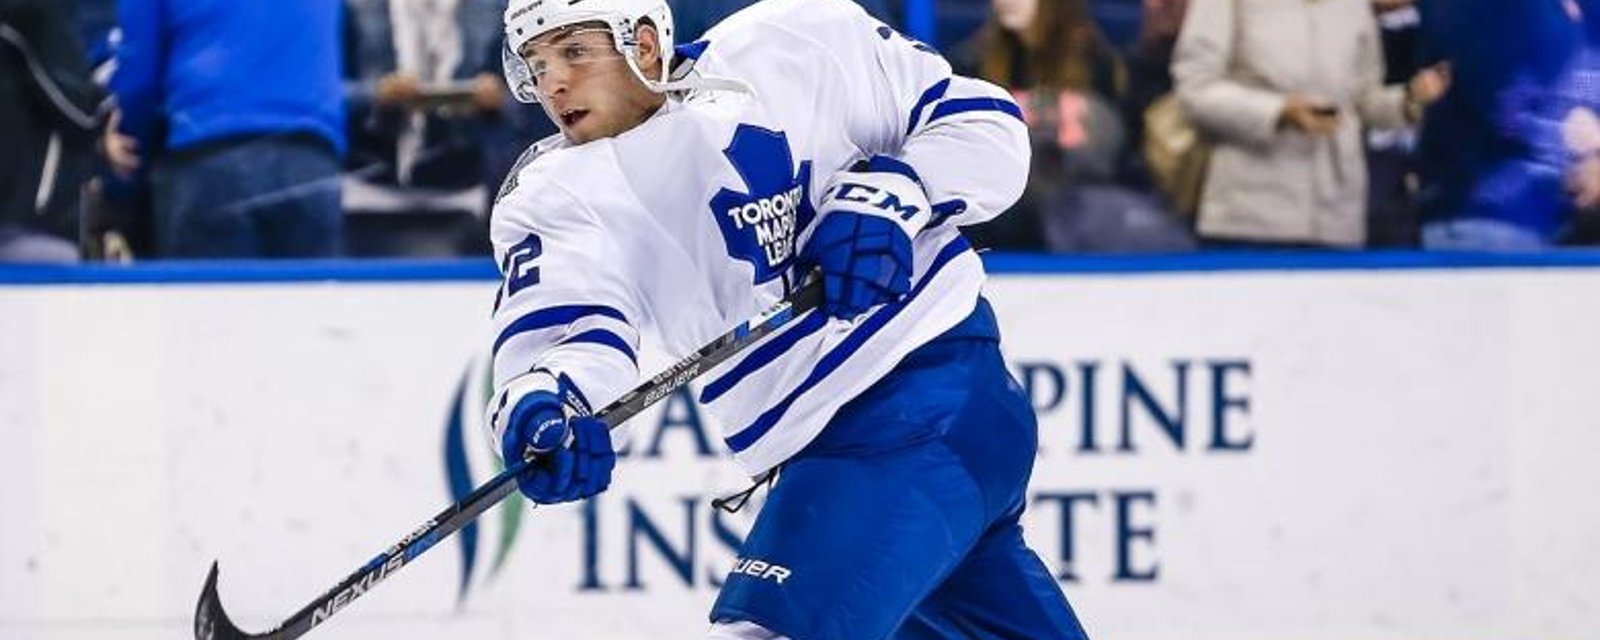 Maple Leafs sign another young forward on Thursday.